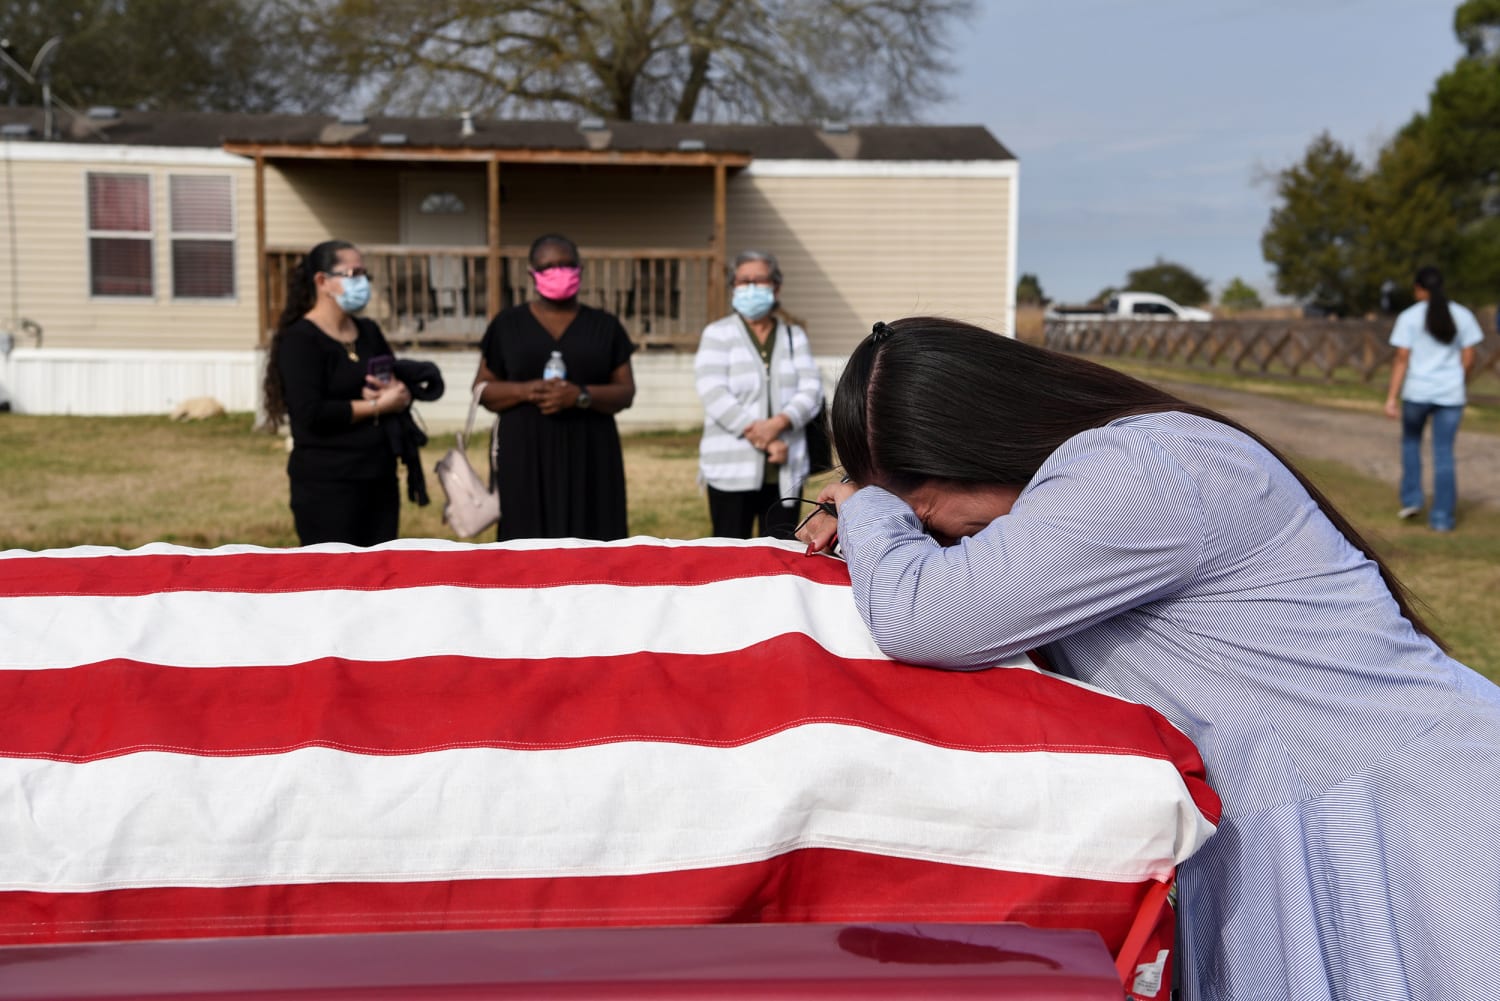 U.S. sets somber record as Covid deaths surpass 800,000, more than any other country